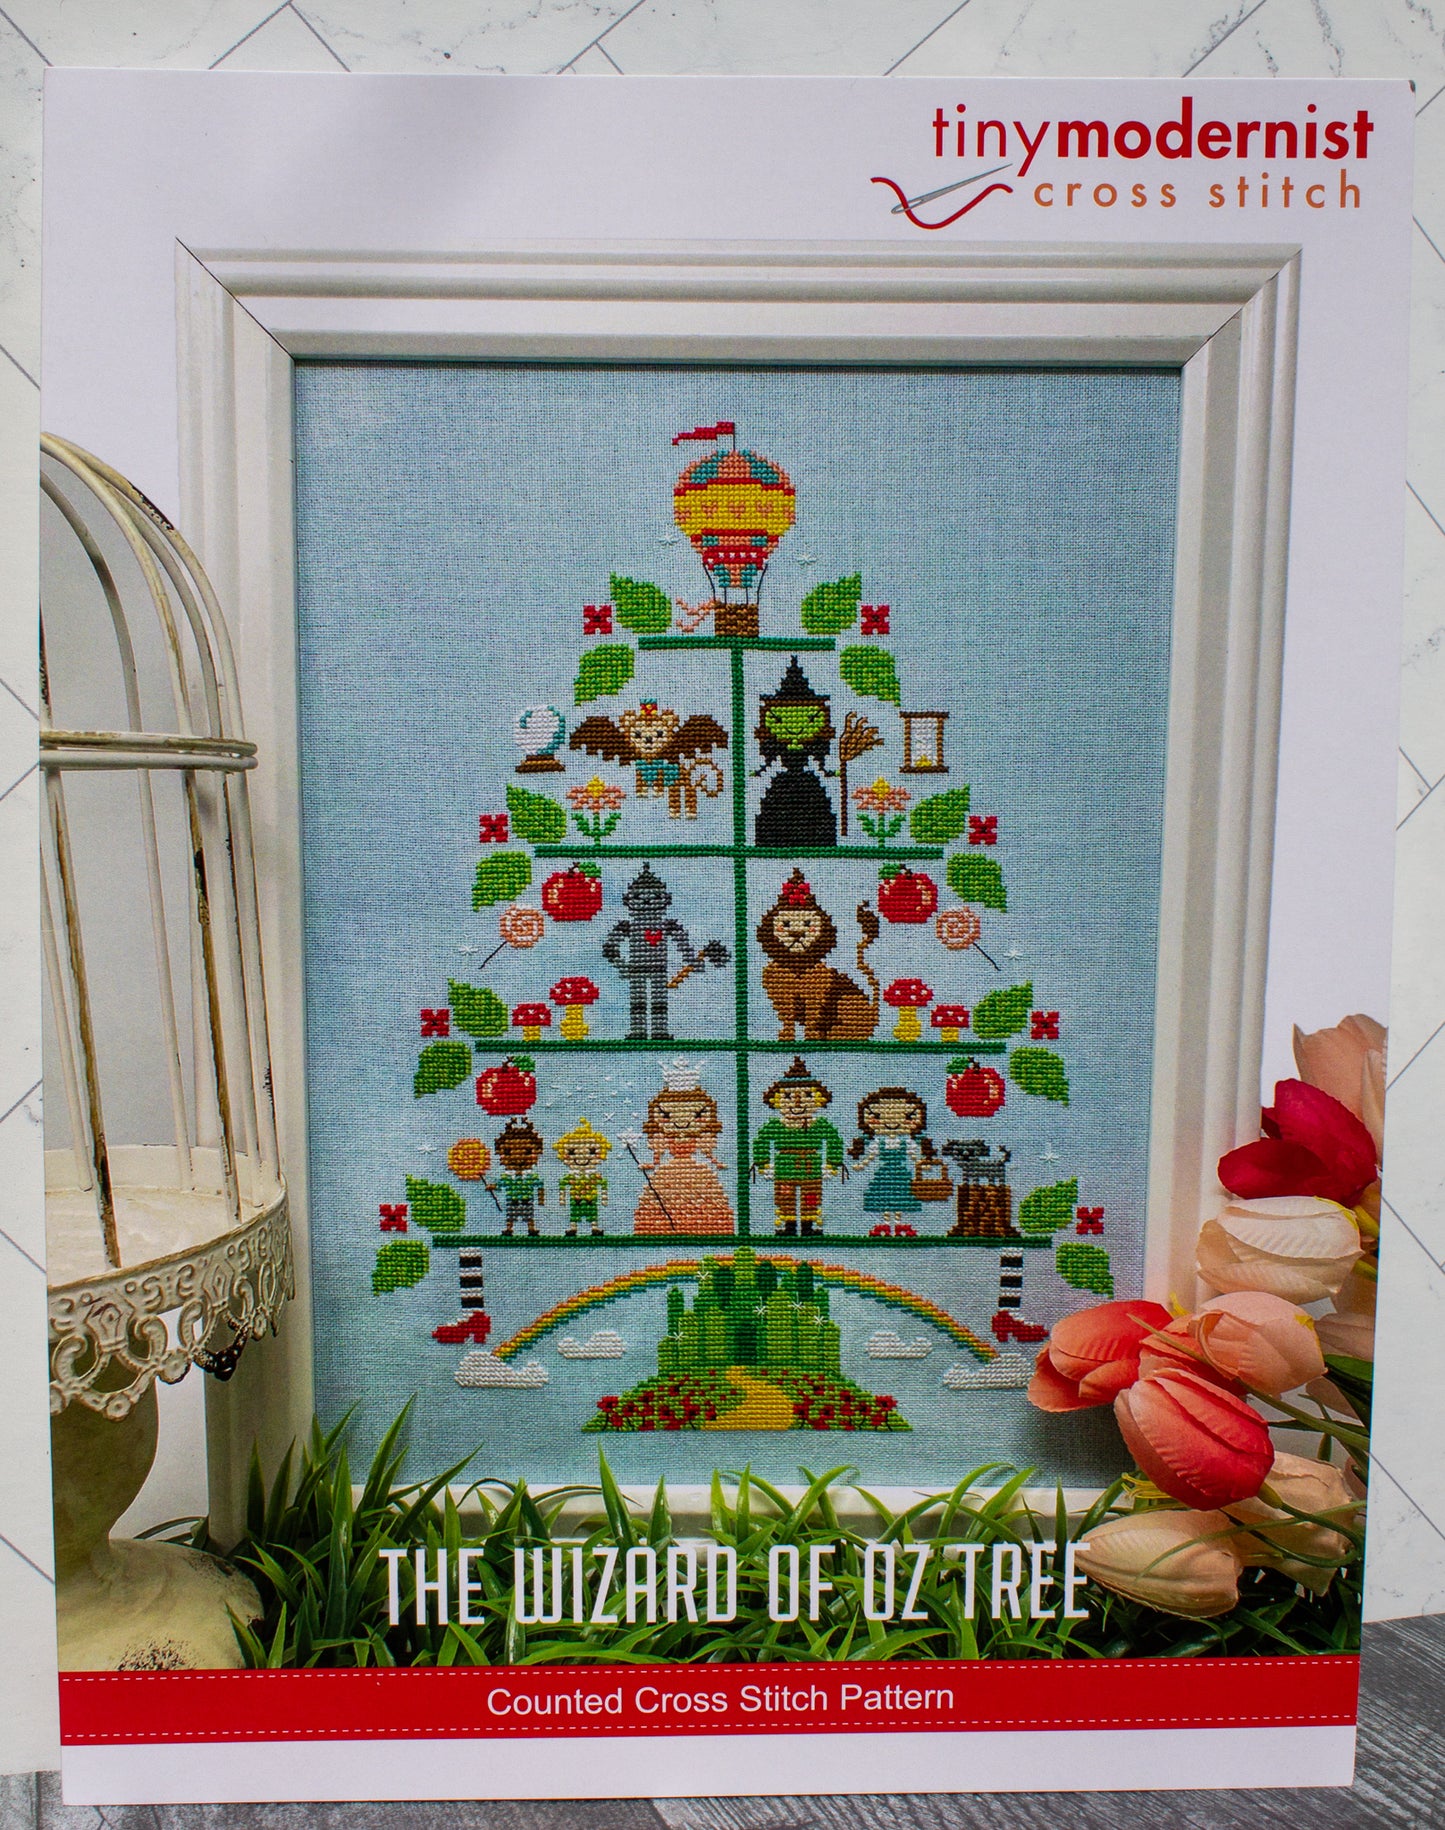 The Wizard of Oz Tree